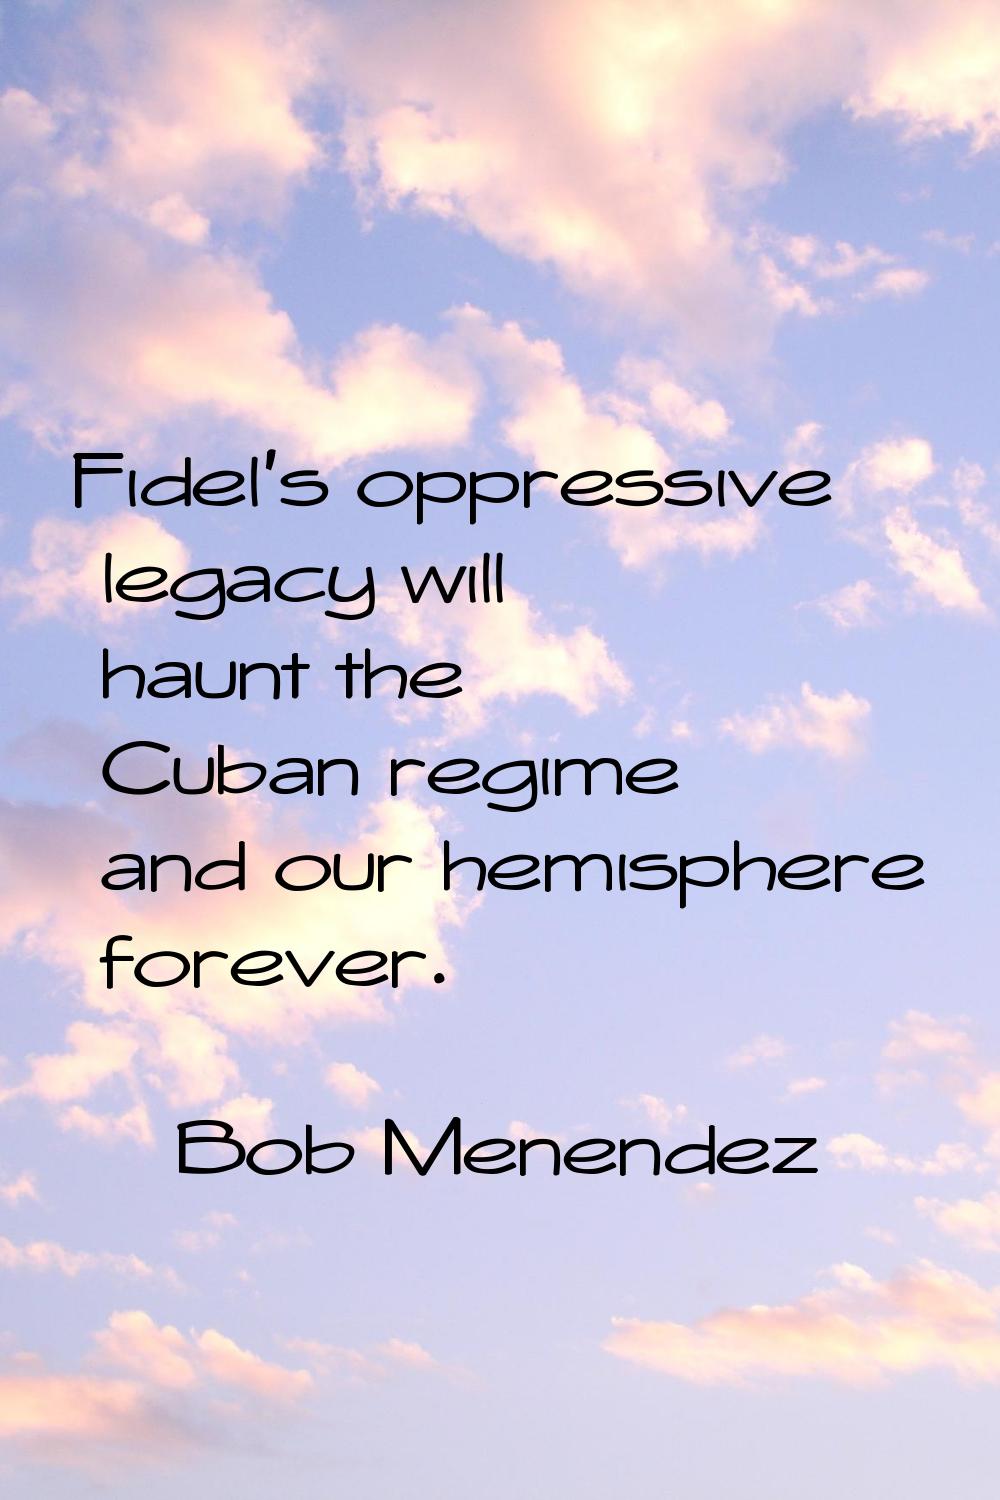 Fidel's oppressive legacy will haunt the Cuban regime and our hemisphere forever.